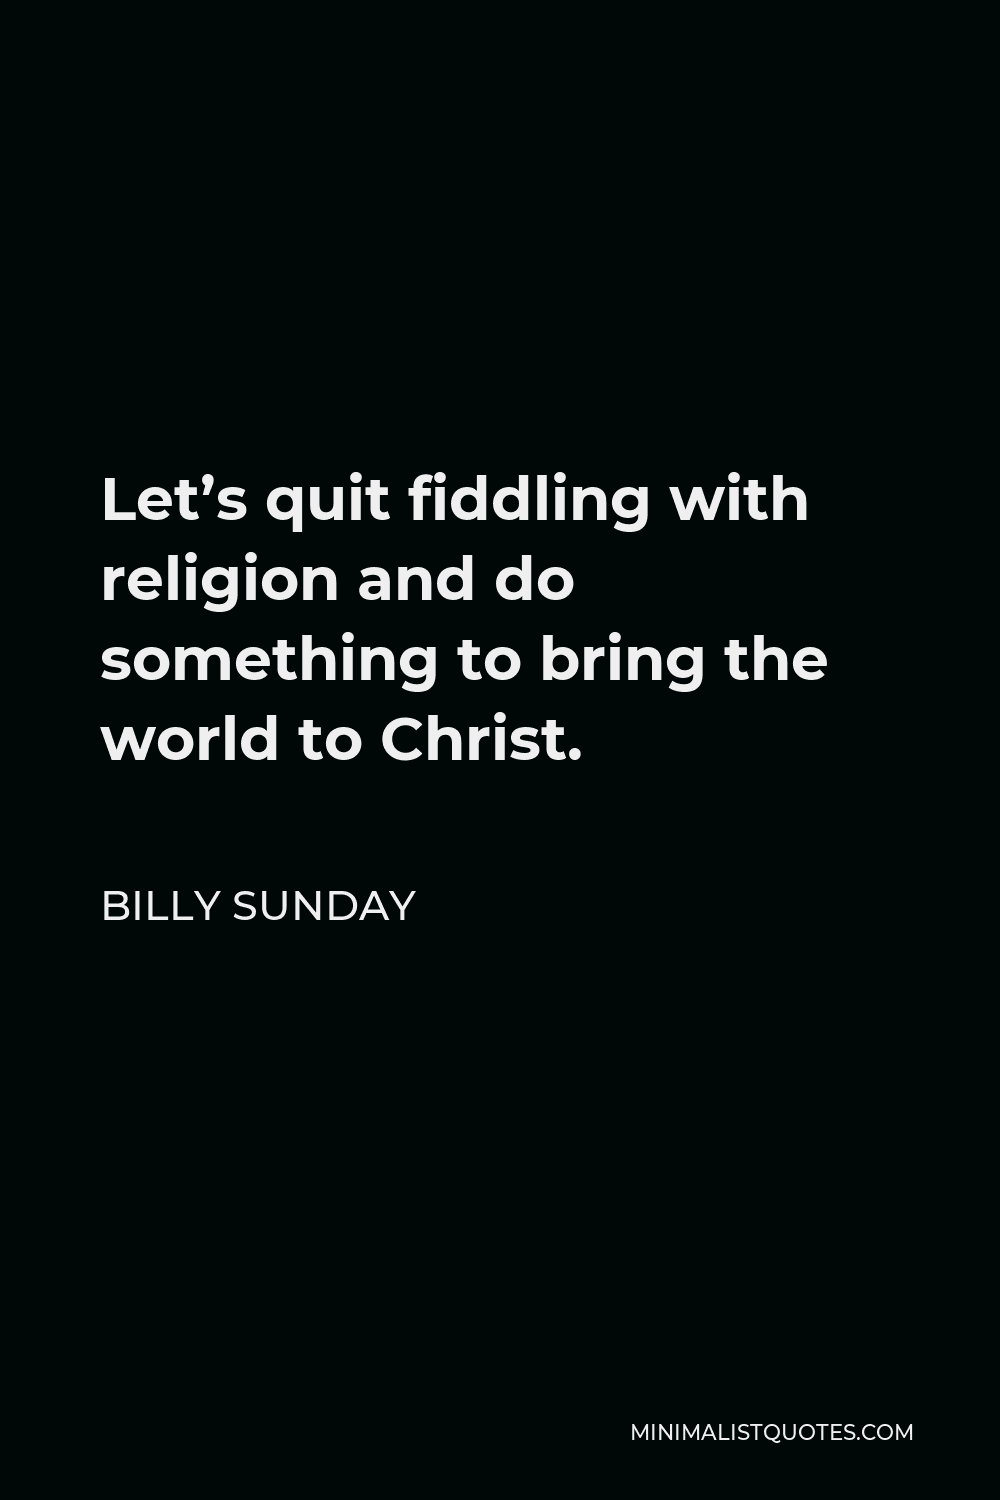 Billy Sunday Quote - Let’s quit fiddling with religion and do something to bring the world to Christ.